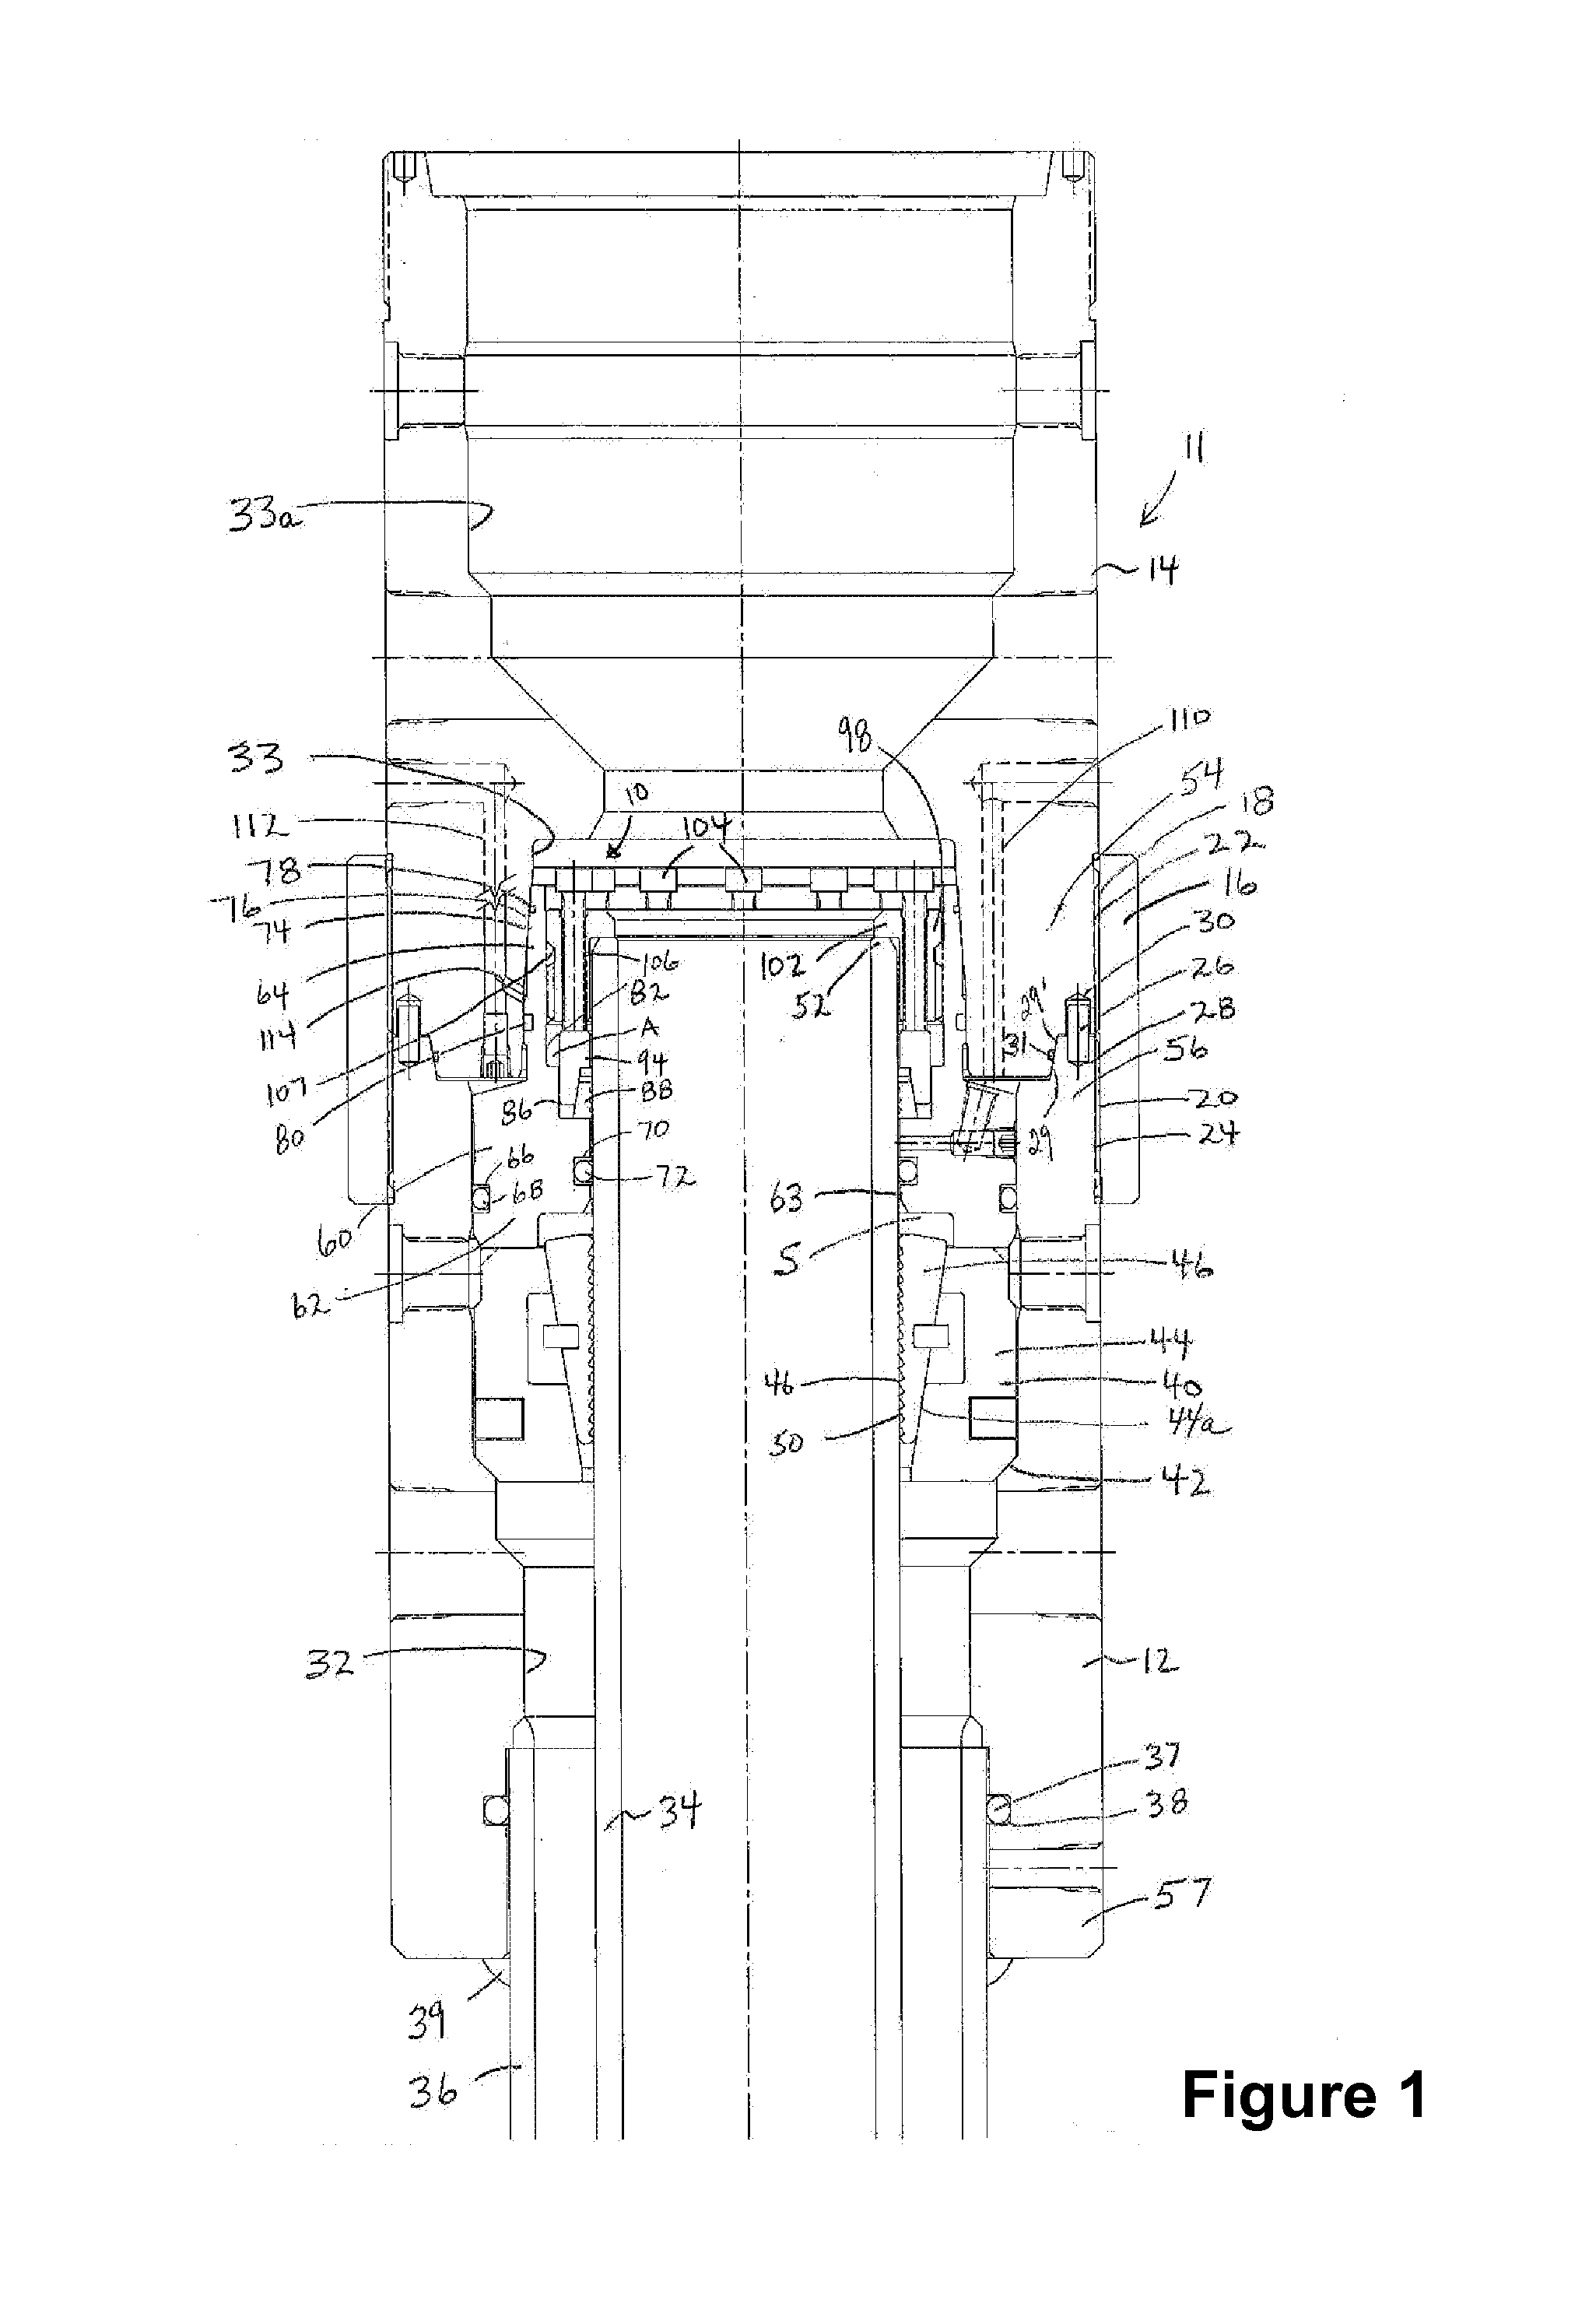 Wellhead seal device to seal casing